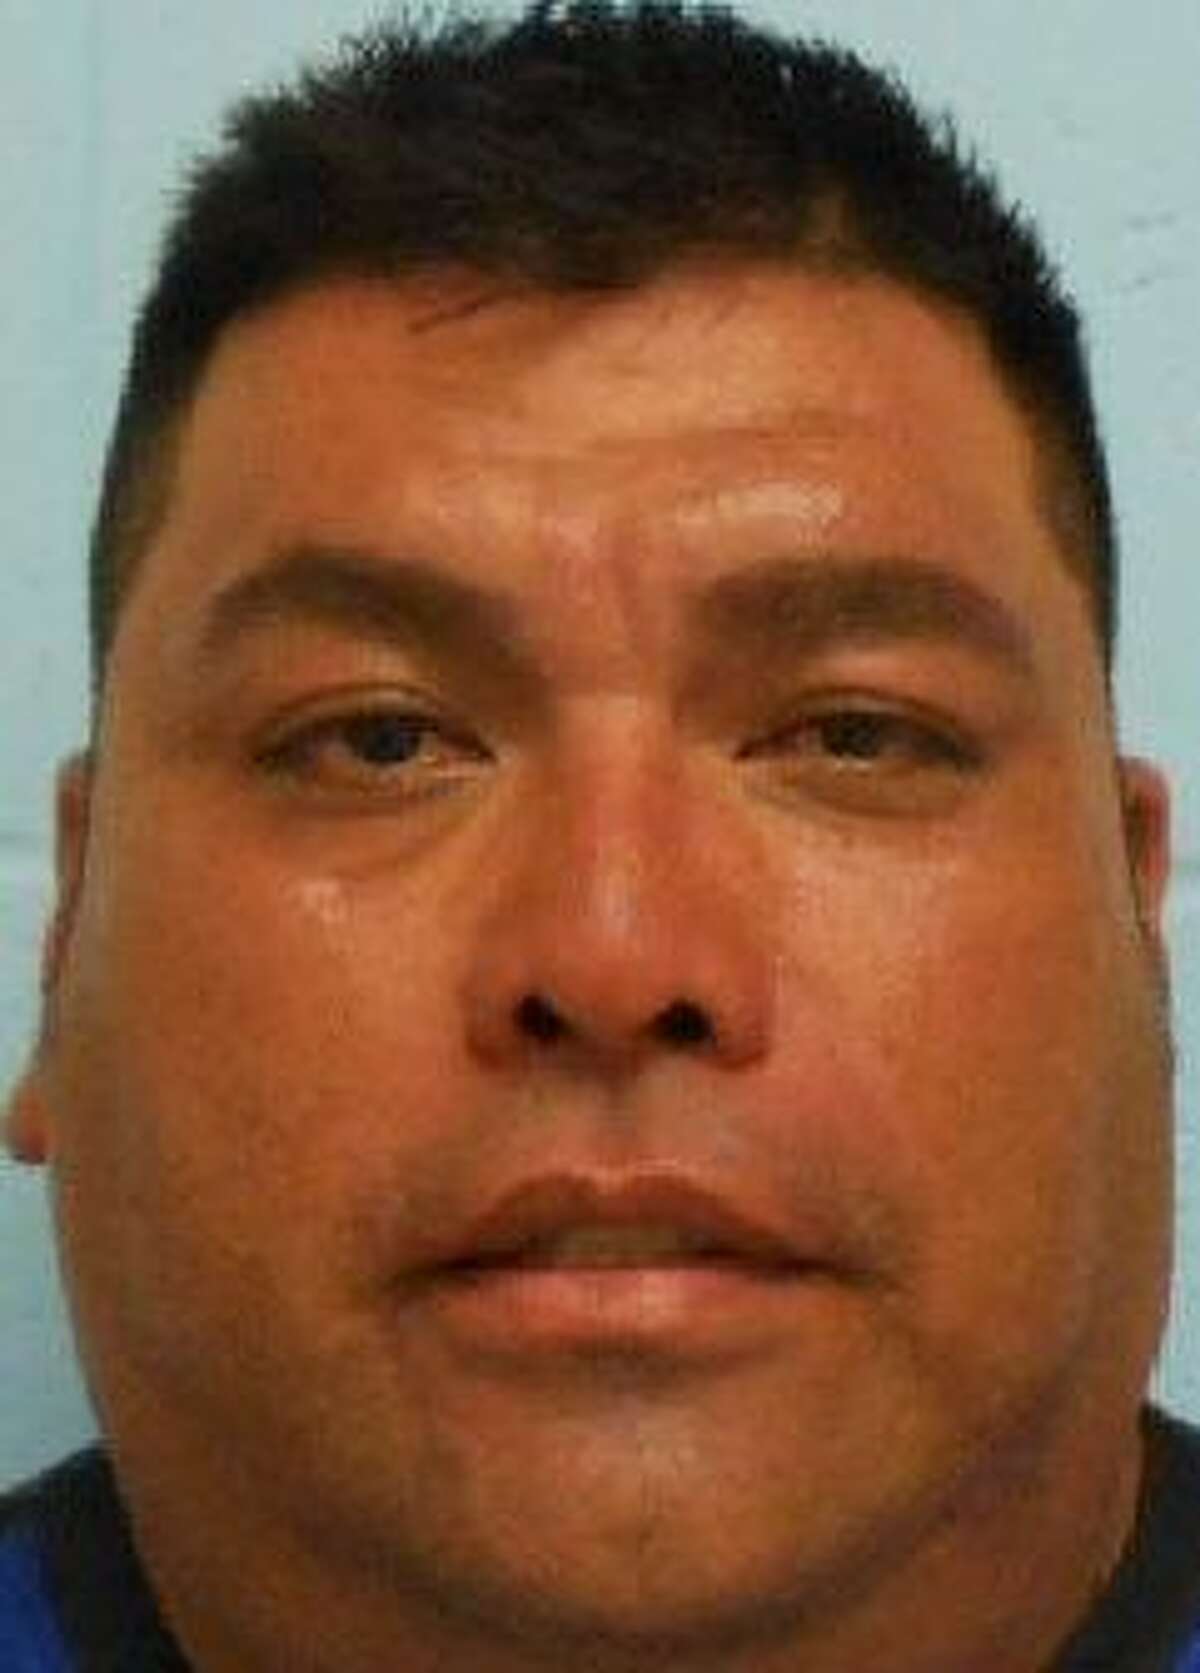 Ambrosio Limon, police commander for Donna Independent School District in South Texas, was placed on administrative leave with pay Tuesday after an alleged fistfight at a softball game, board president Alberto Sandoval told The McAllen Monitor. Limon allegedly fought with Ramon Garcia, a member of the opposing team, on Saturday at a park in McAllen.